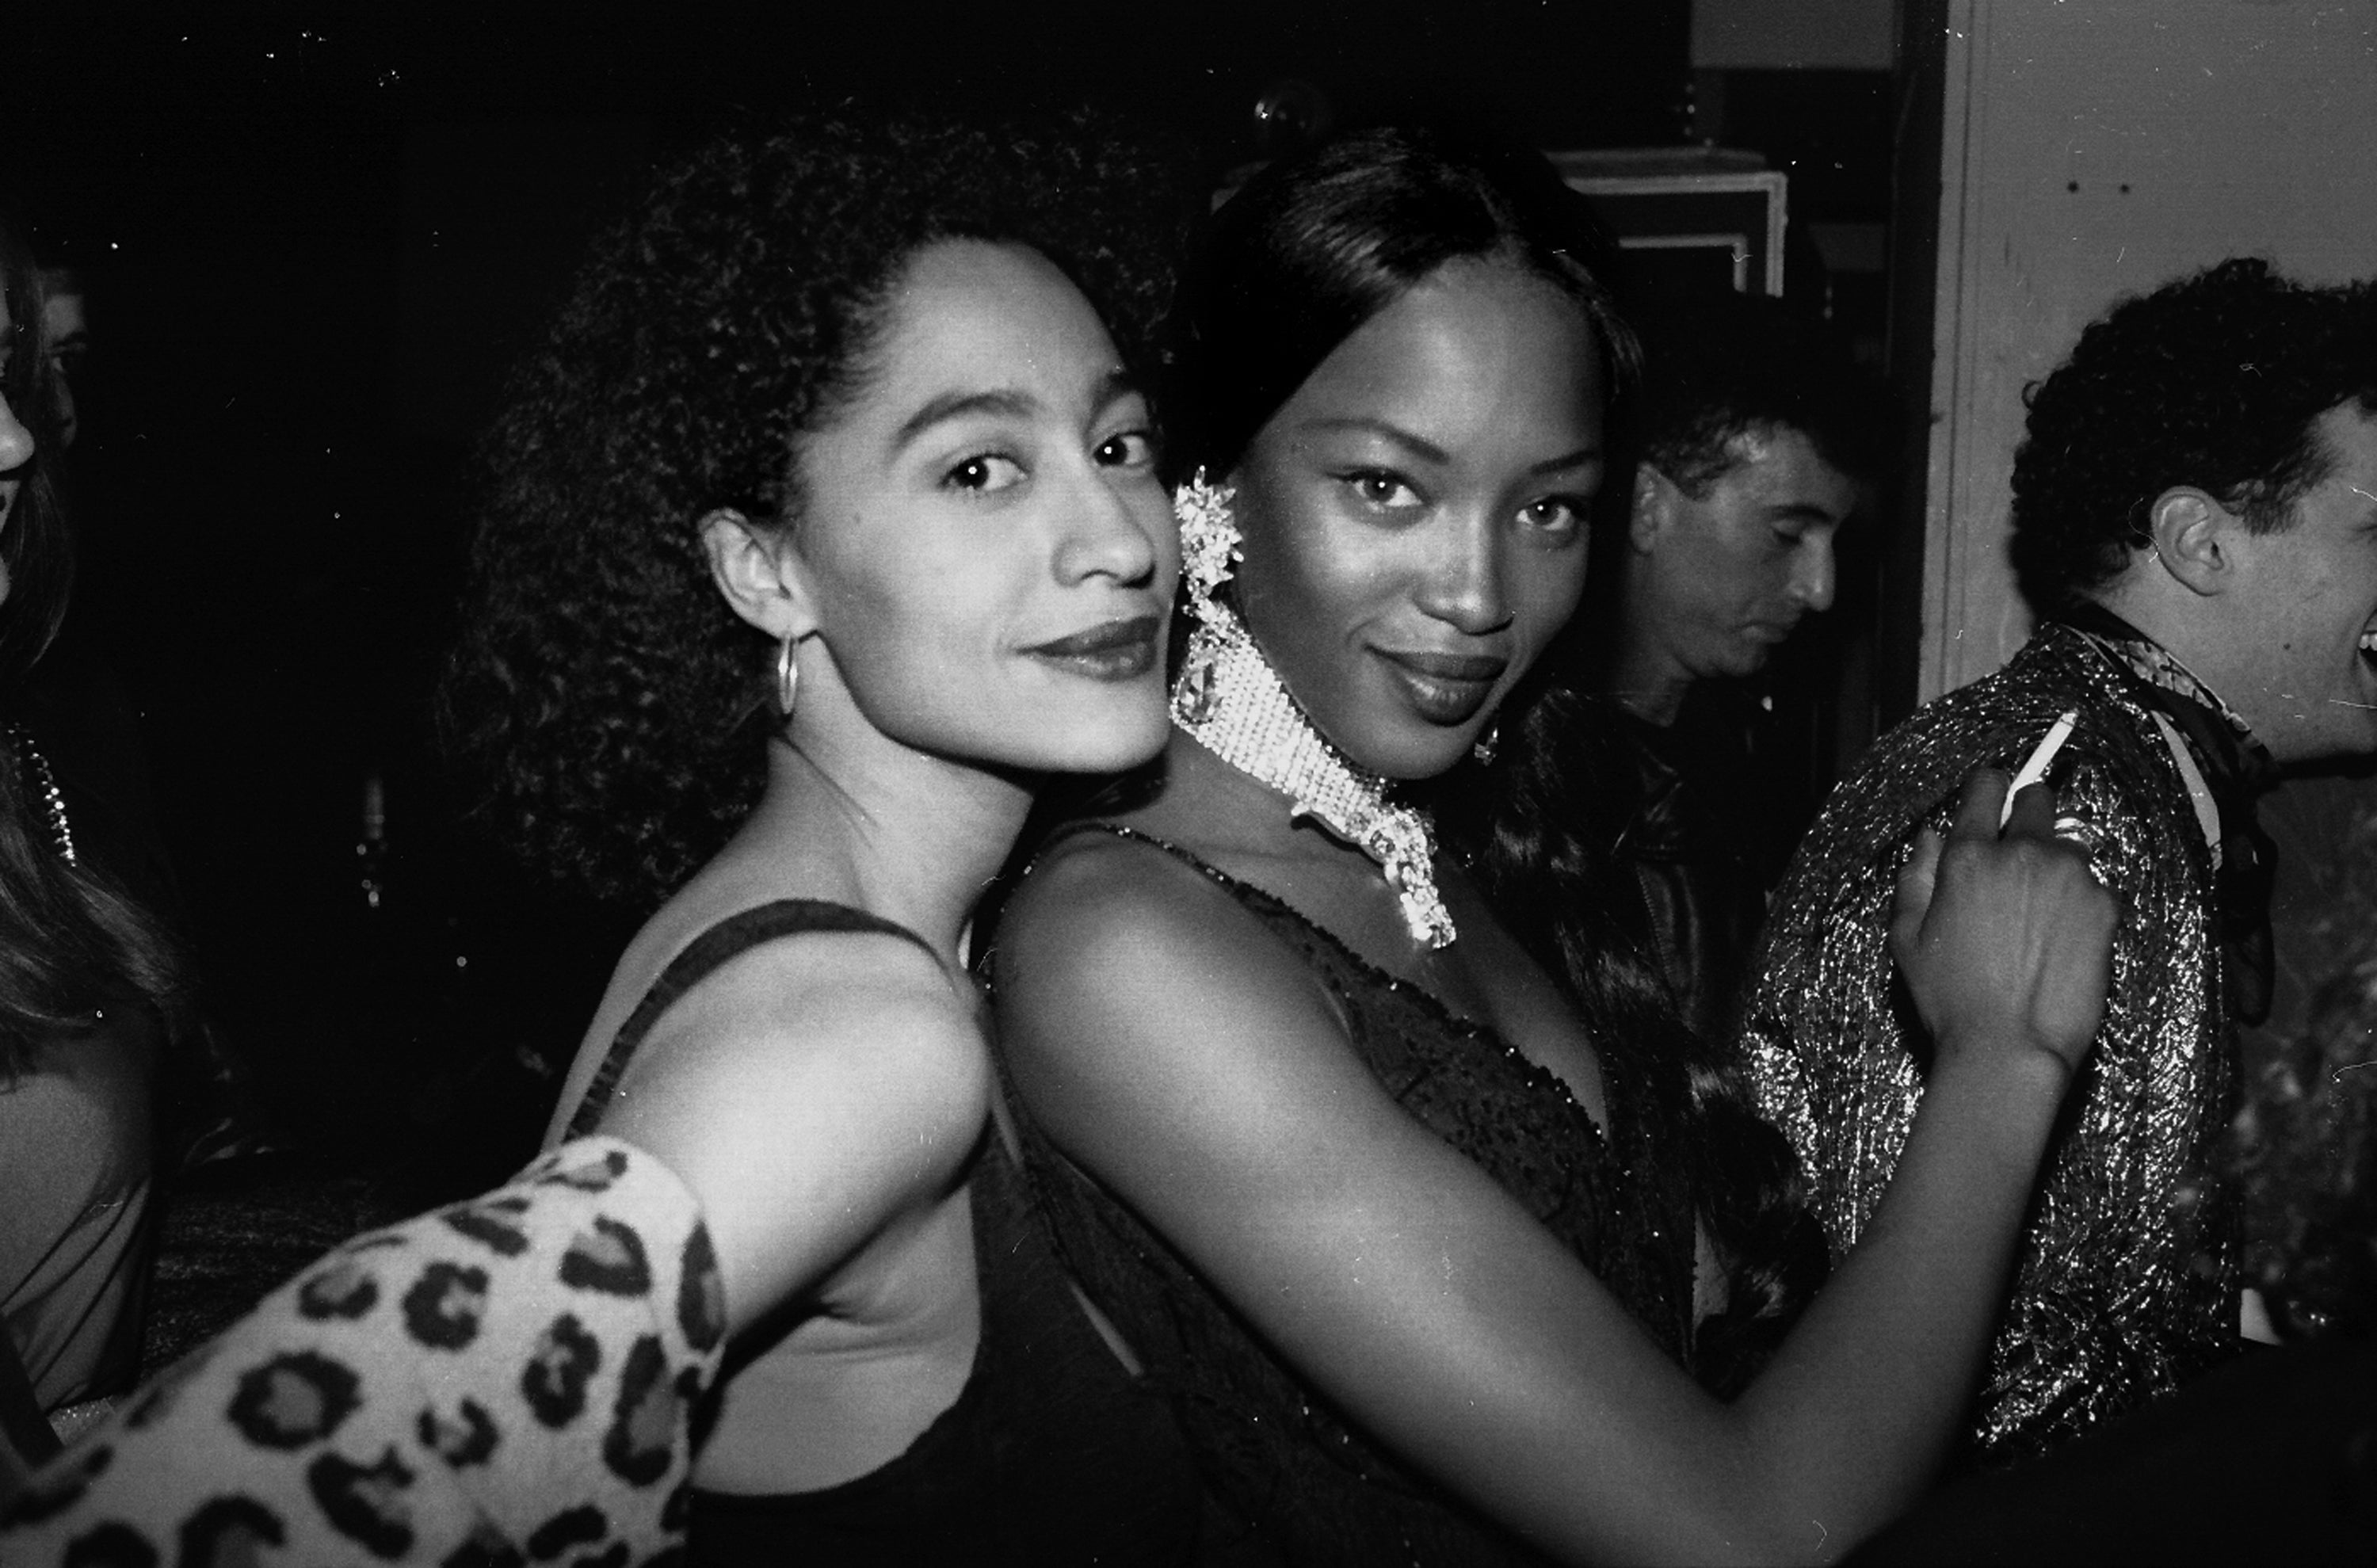 21 Throwback Photos That Prove Tracee Ellis Ross Has Always Been a Fashion Darling
